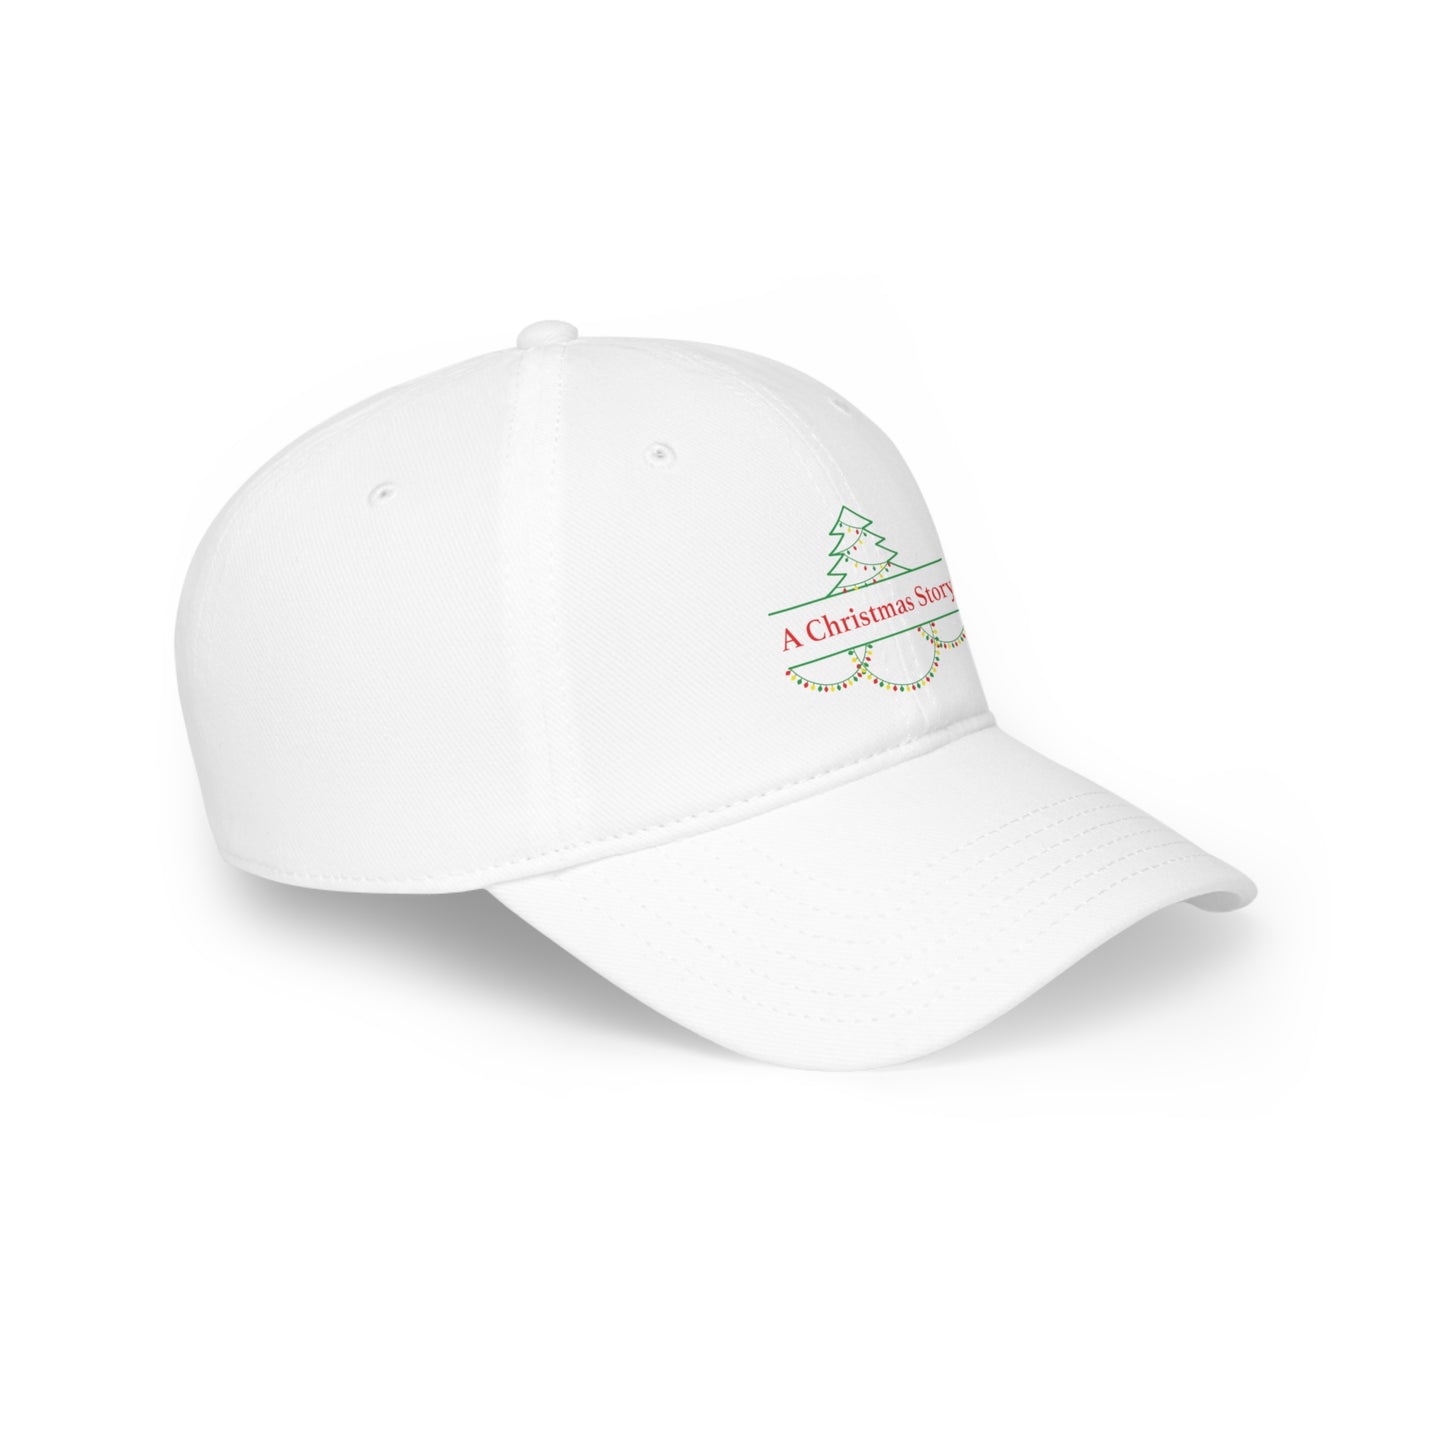 Give Without Expecting_ from A Christmas Story_Low Profile Baseball Cap